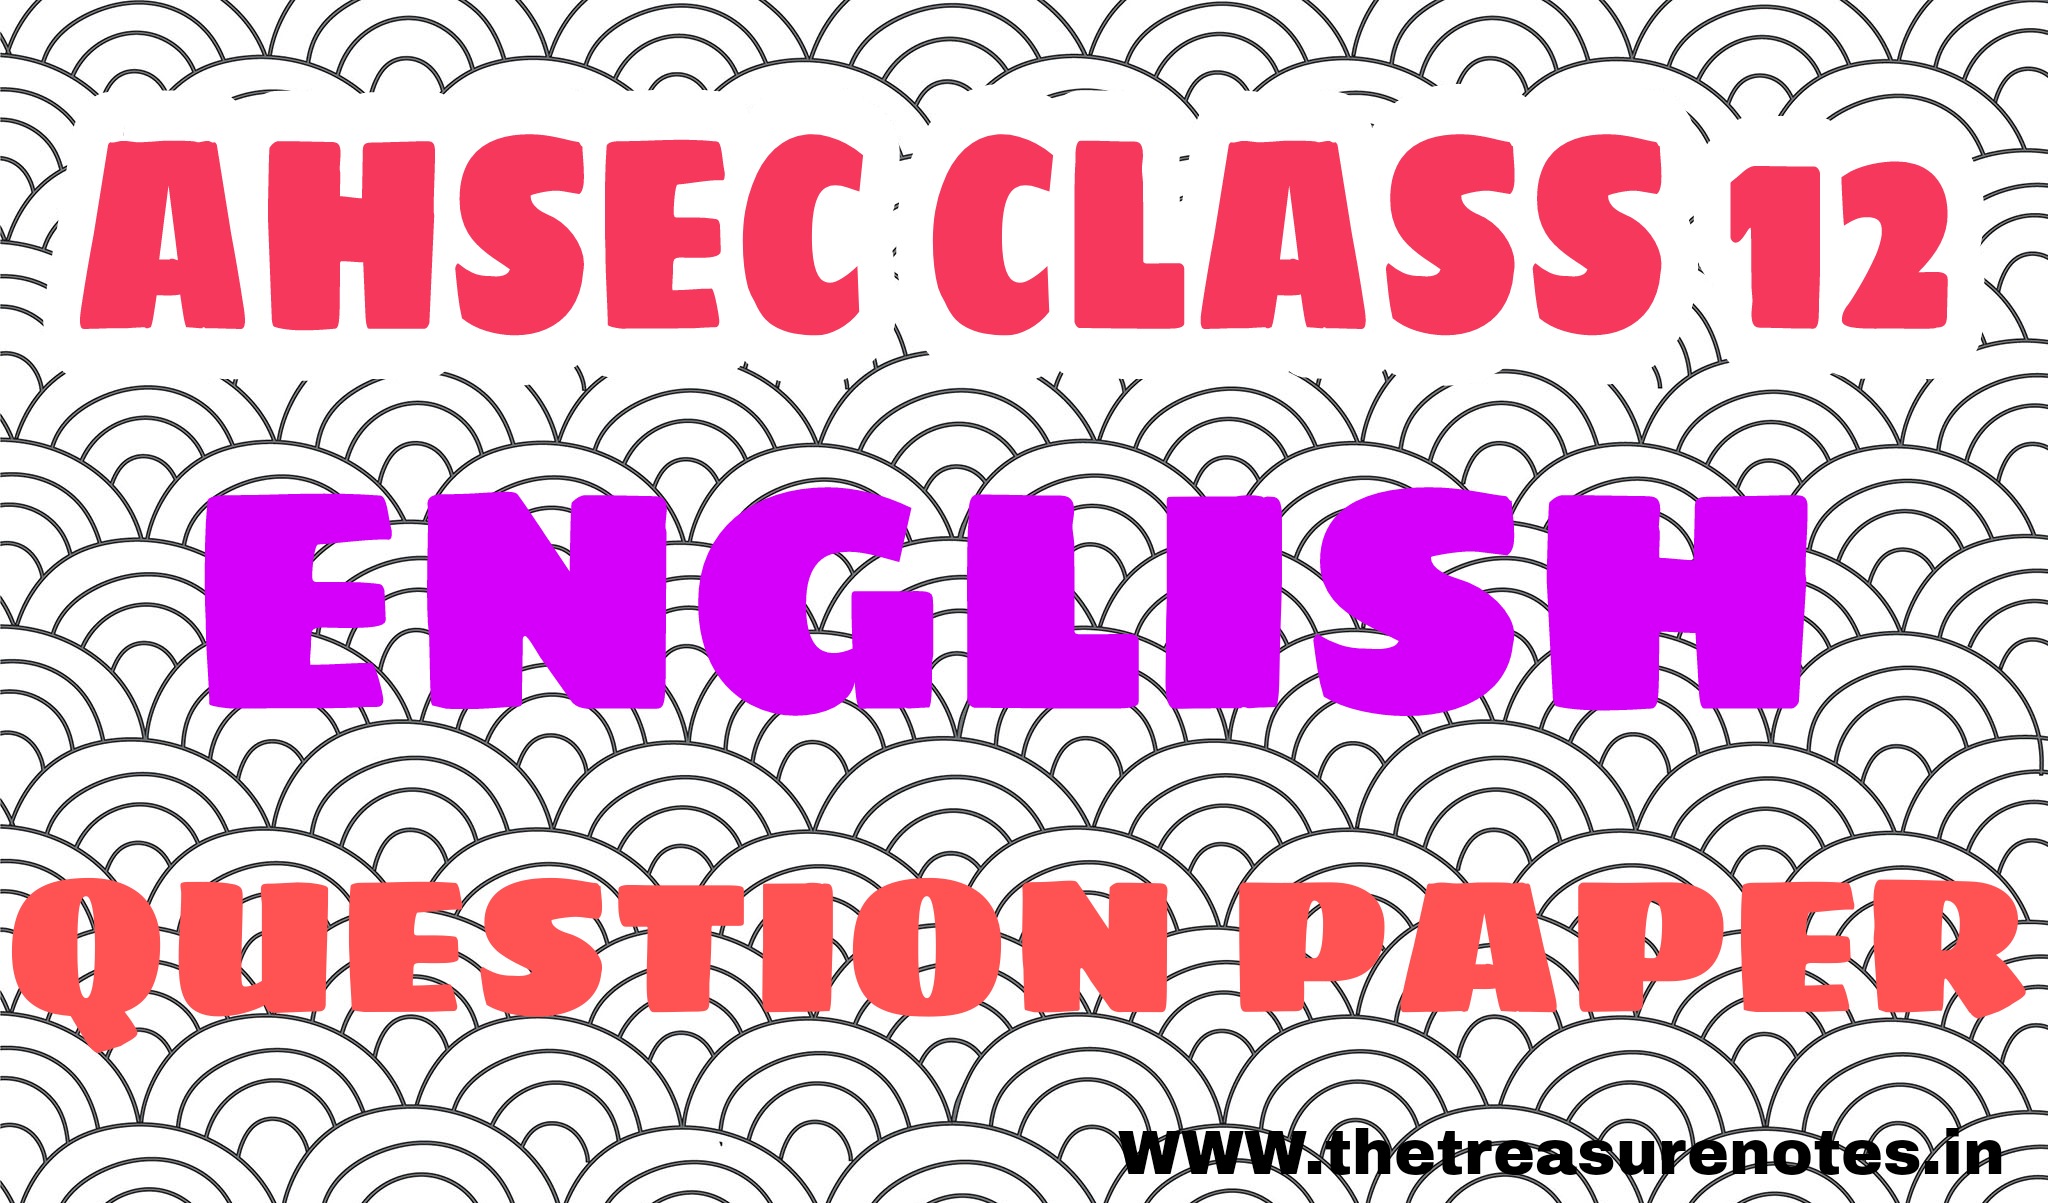 AHSEC Class 12 English Question paper'2013 | HS 2nd Year English Question paper '2013, Download Assam Class 12 English Question paper 2013,Hs 2nd year English Question paper